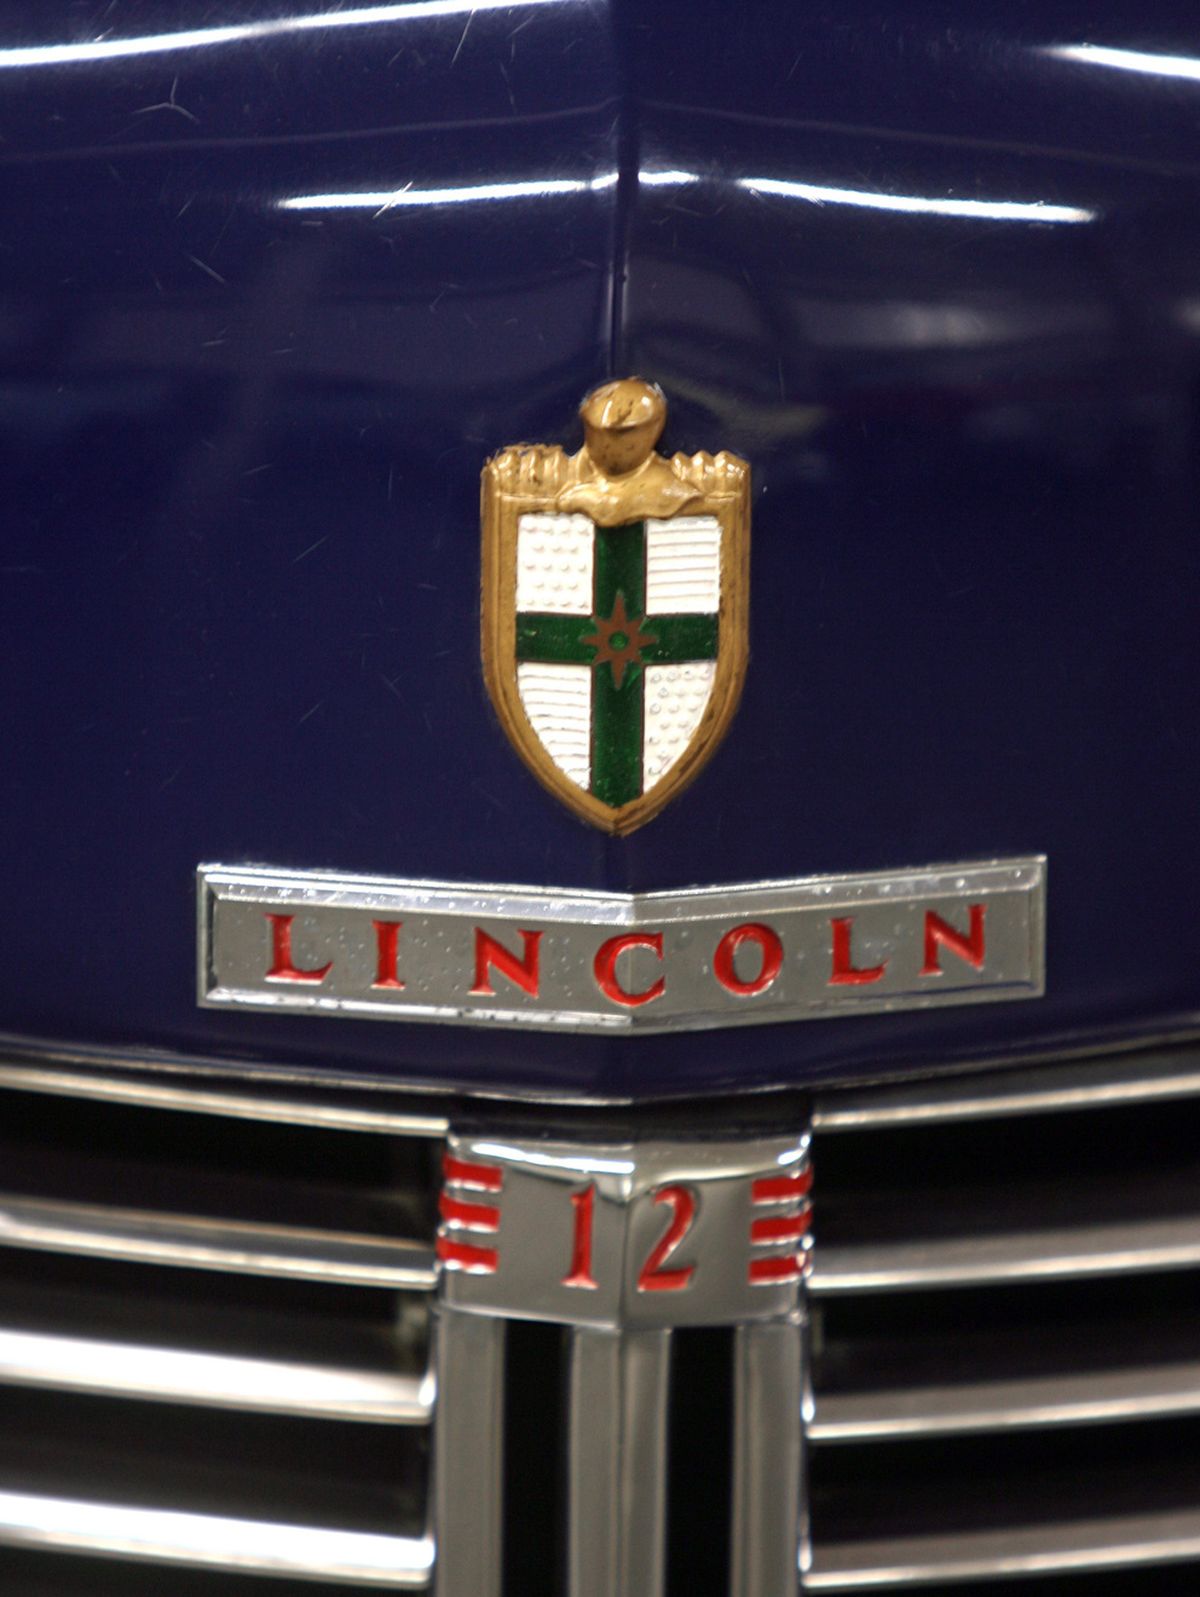 The front grille of a 1942 Lincoln Continental two-door coupe, which had a V-12 engine.